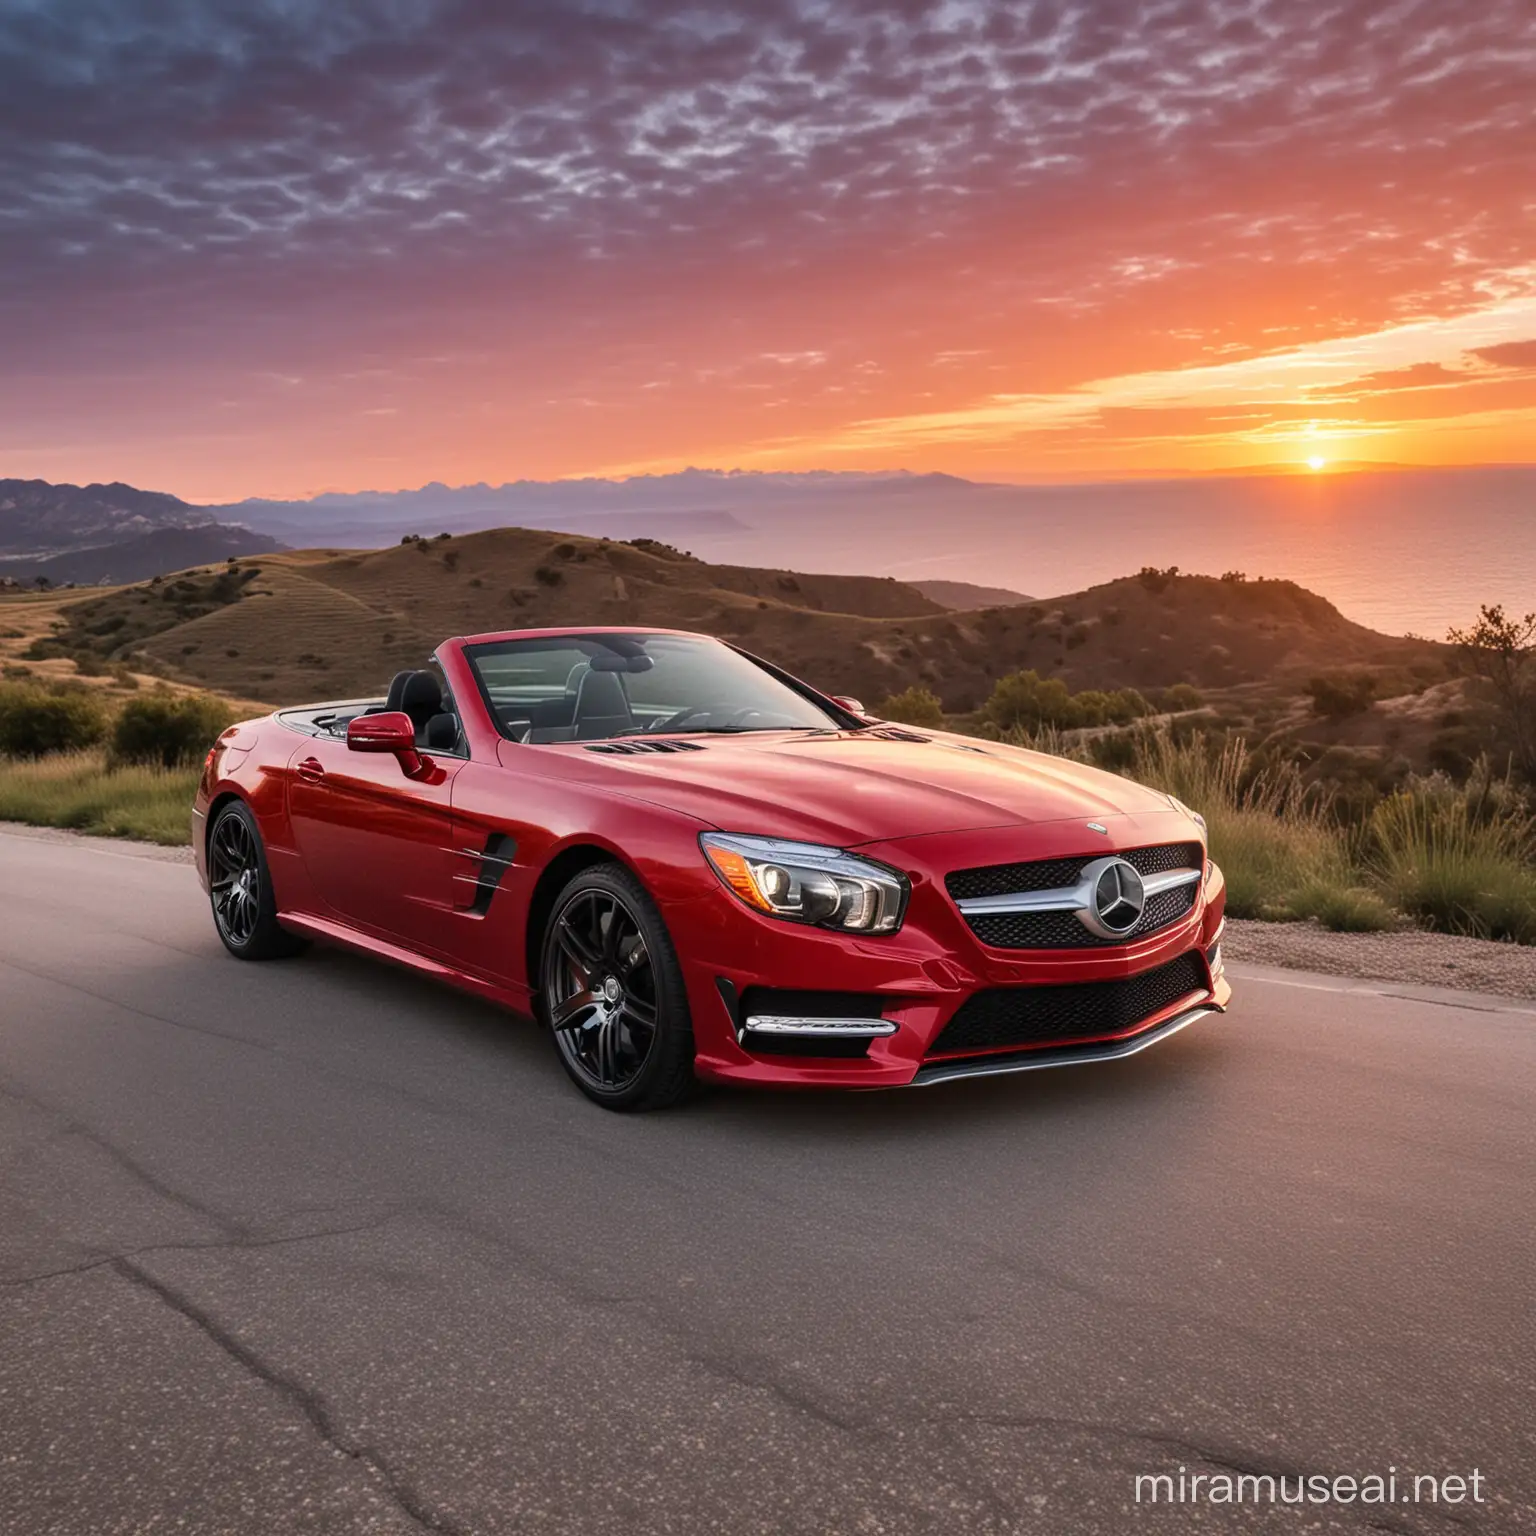 Sunset Drive in a Red 2014 Mercedes SL400